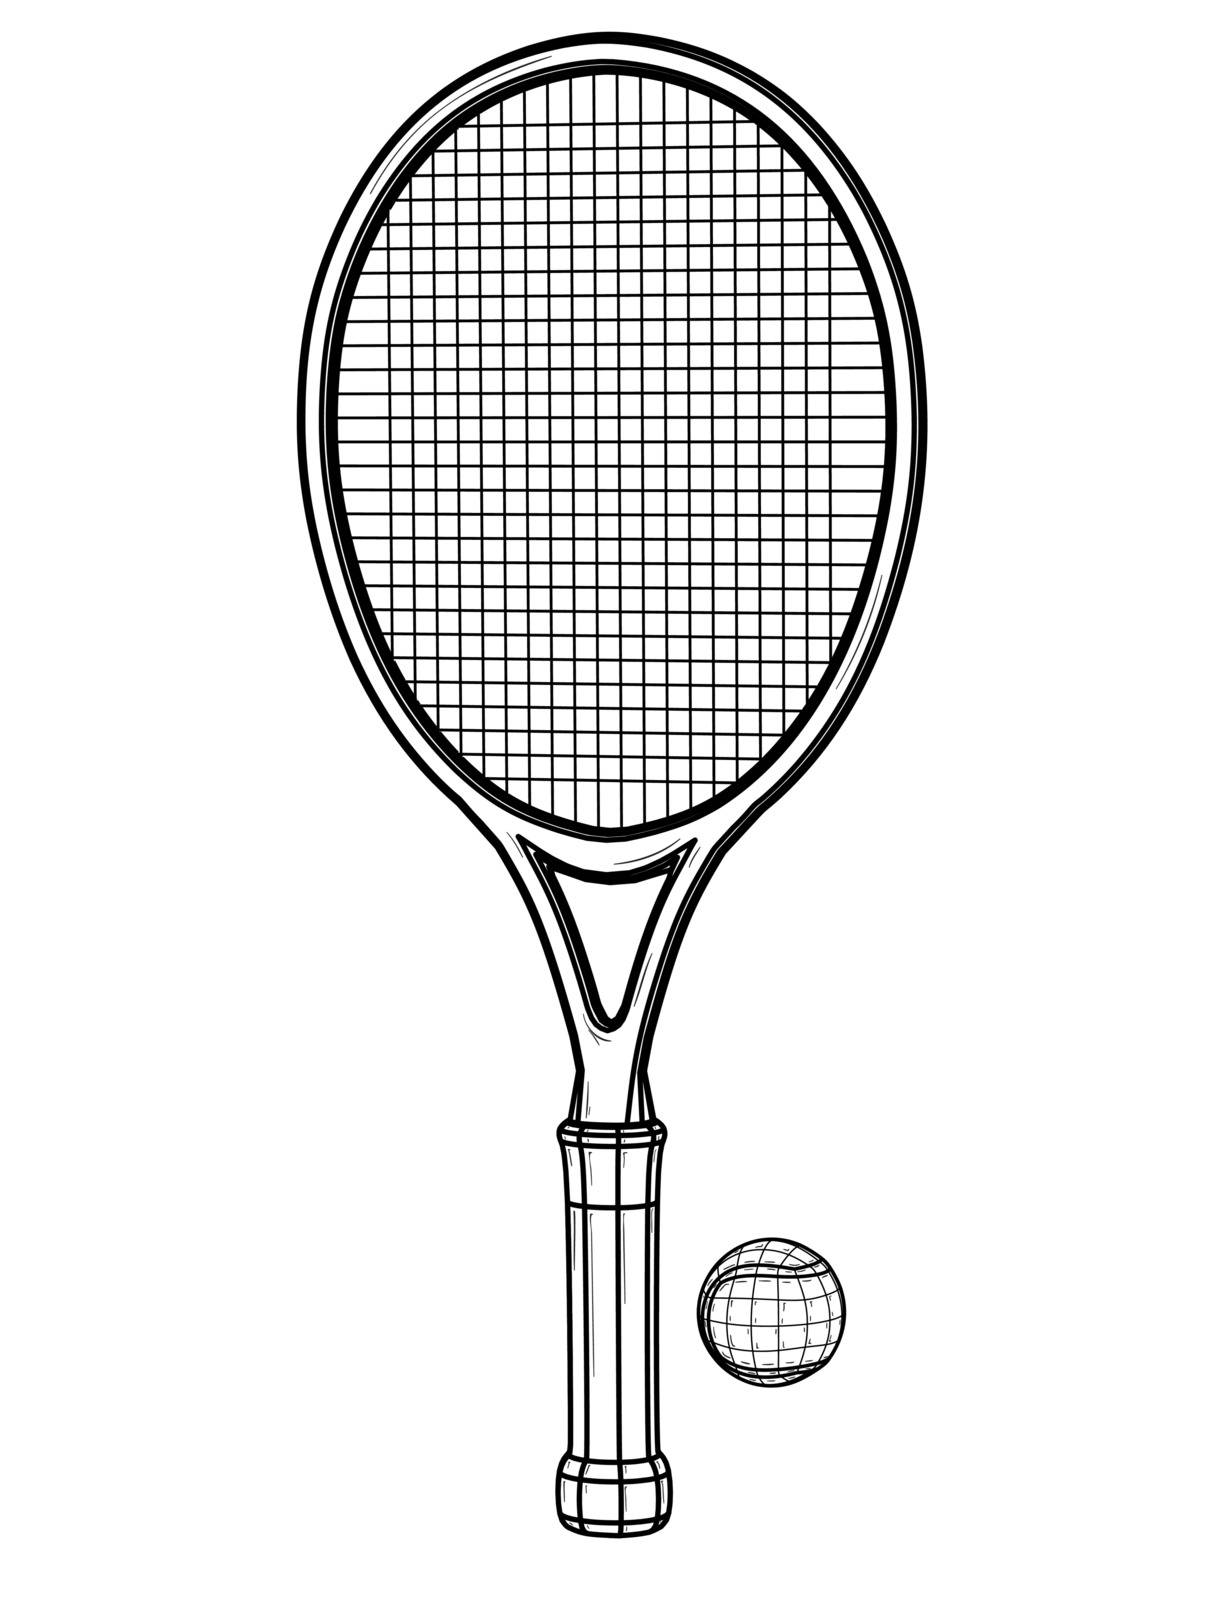 One tennis racket and ball. Sports equipment. Black outline illustration on white background. Sketch.